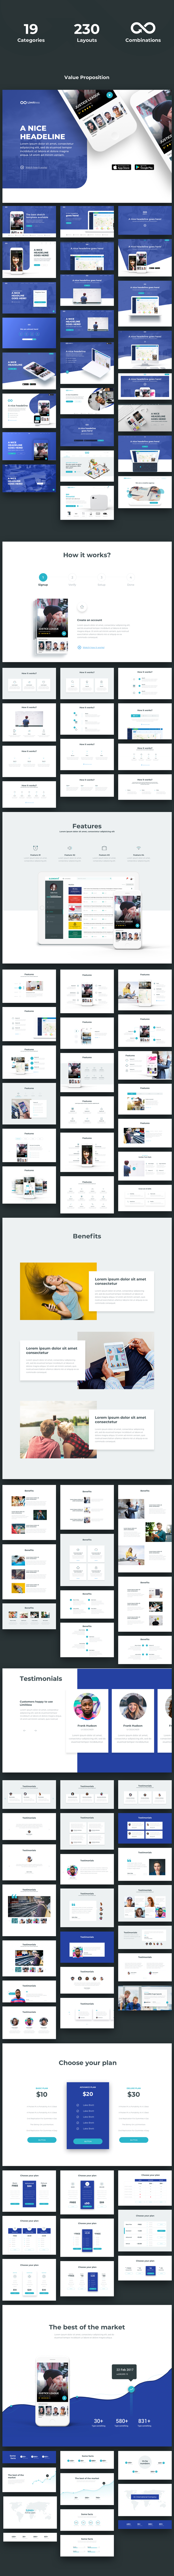 4c1a4762696433.5a9fd78369e72 - Limitless - Massive set of layouts and UI components for Sketch